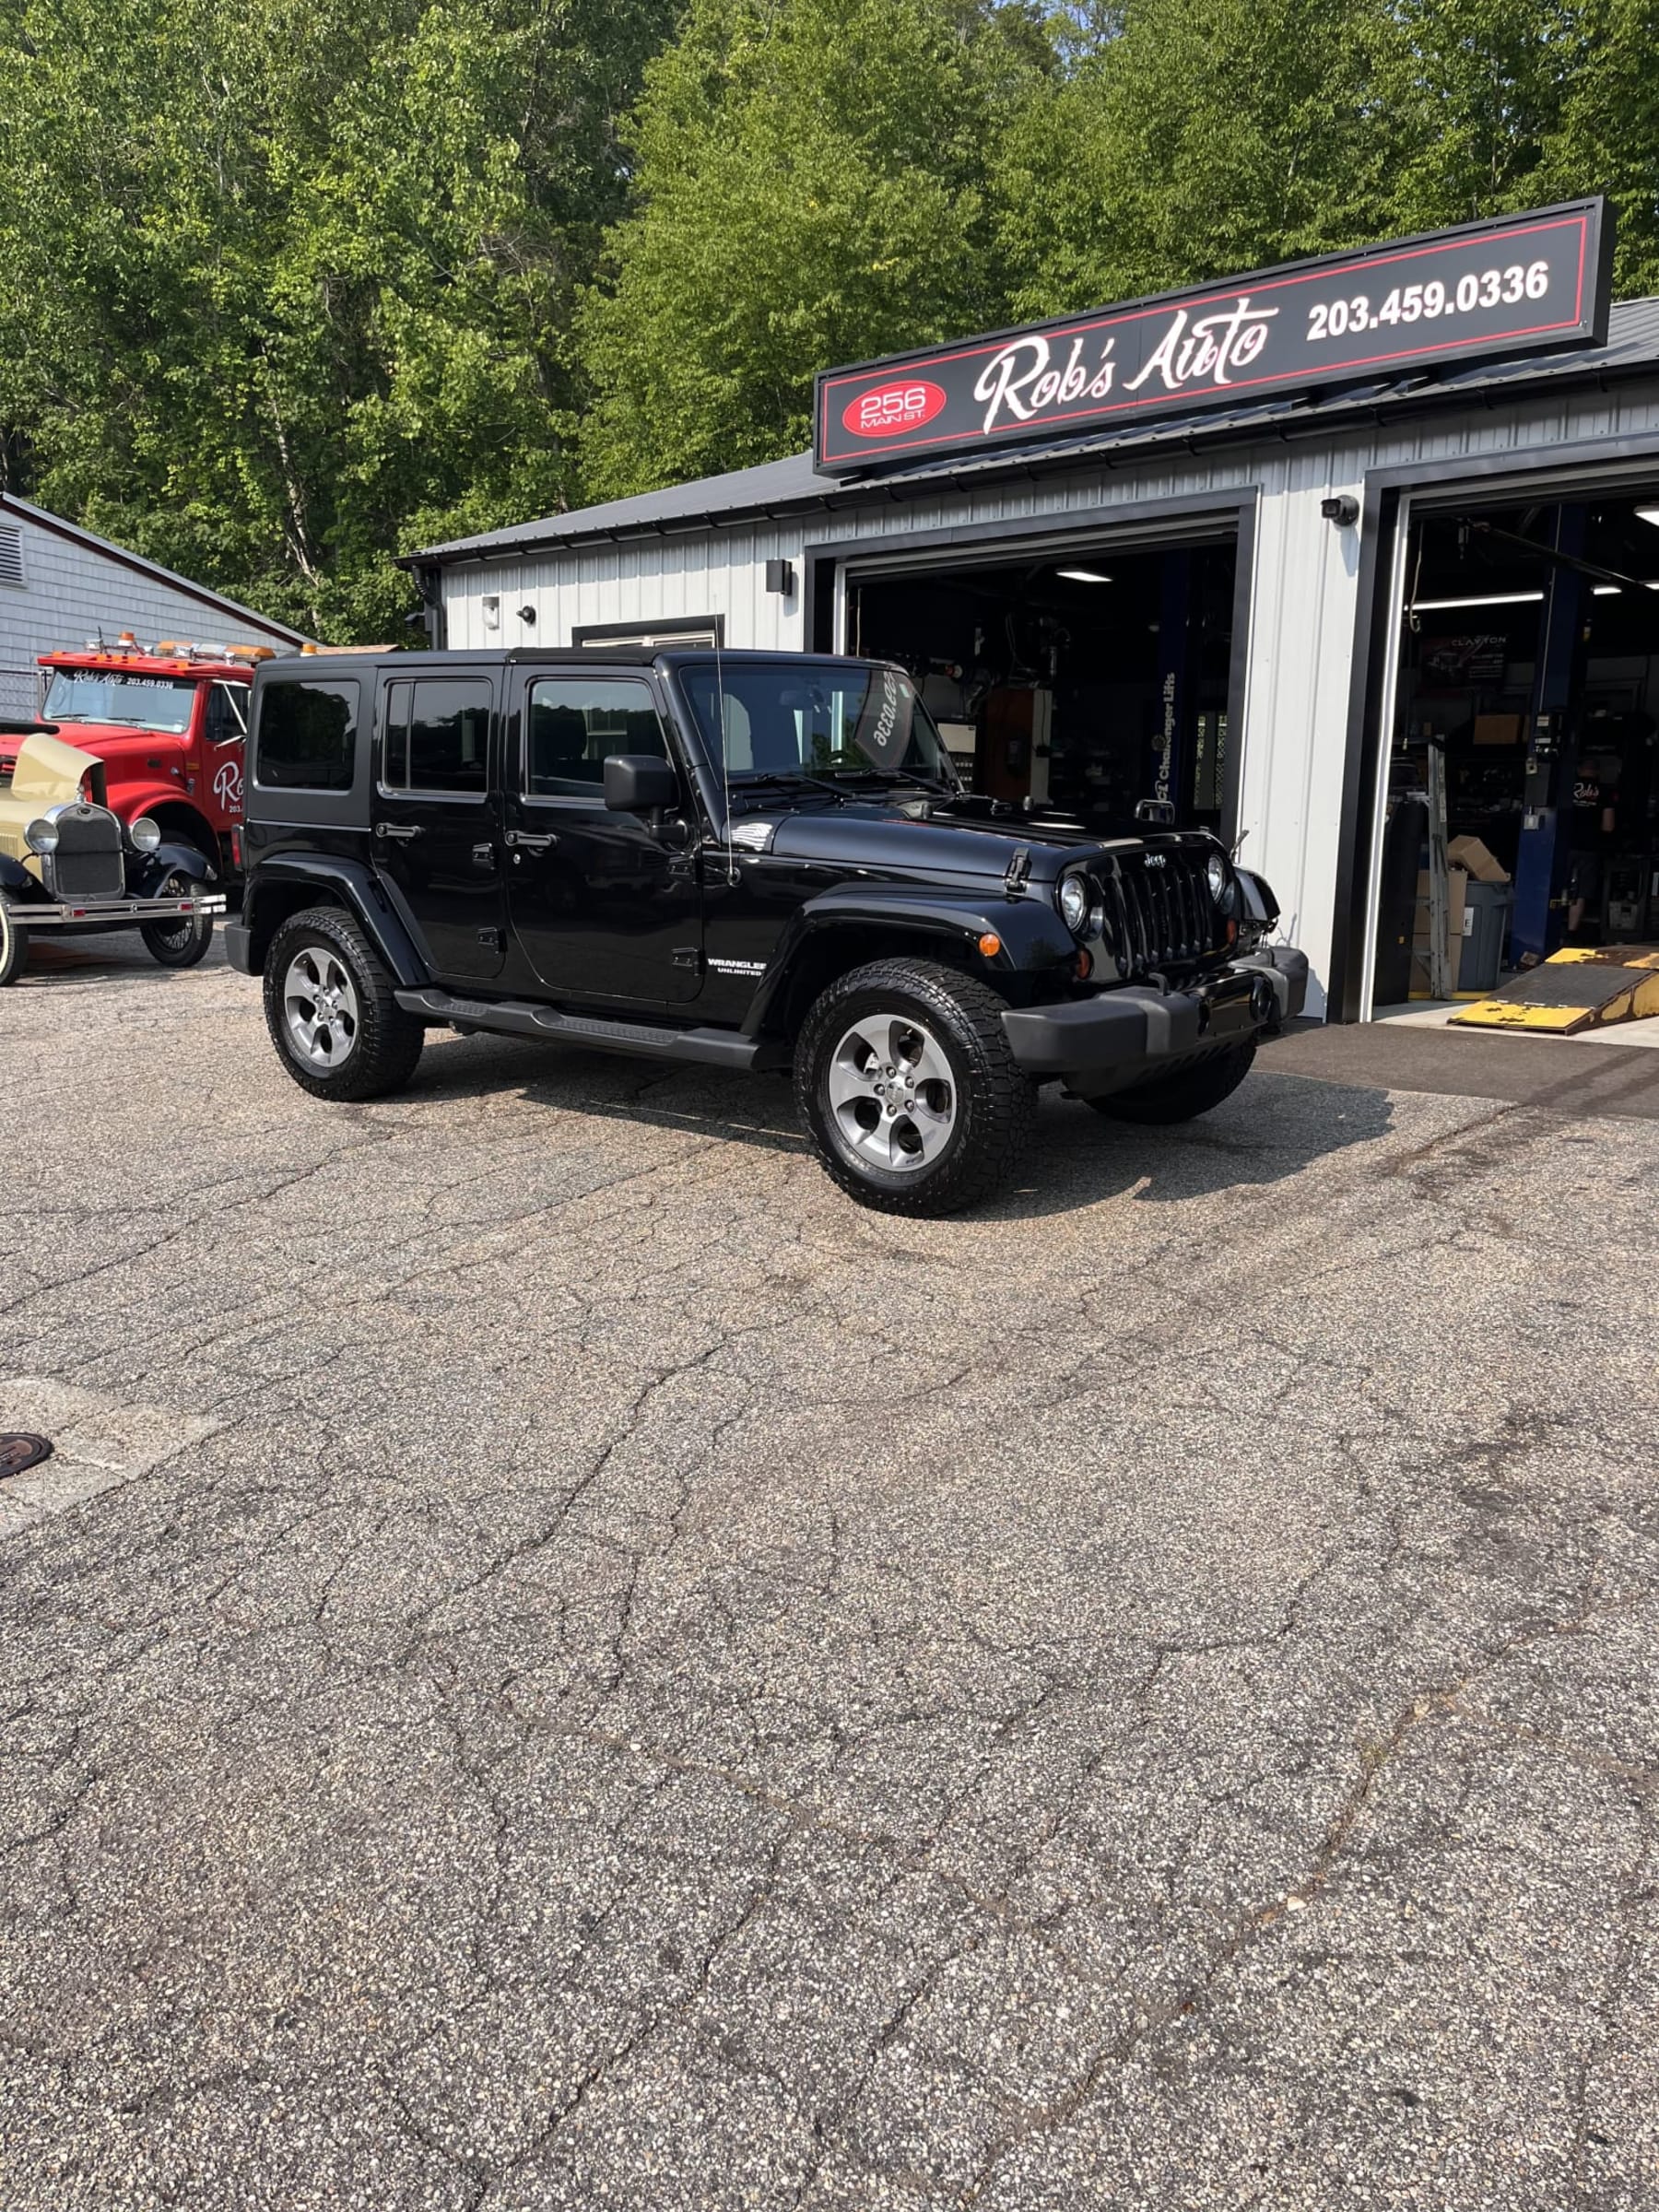 New Arrival!! 2017 Jeep Wrangler Unlimited Sahara!! Clean carfax! No Accidents, runs and drives like new! Fresh trade-in!! Freedom Hardtop, Bikini top, Bluetooth and much more! Priced $2000 under retail! Just hit 100k miles! Only $24,900!!